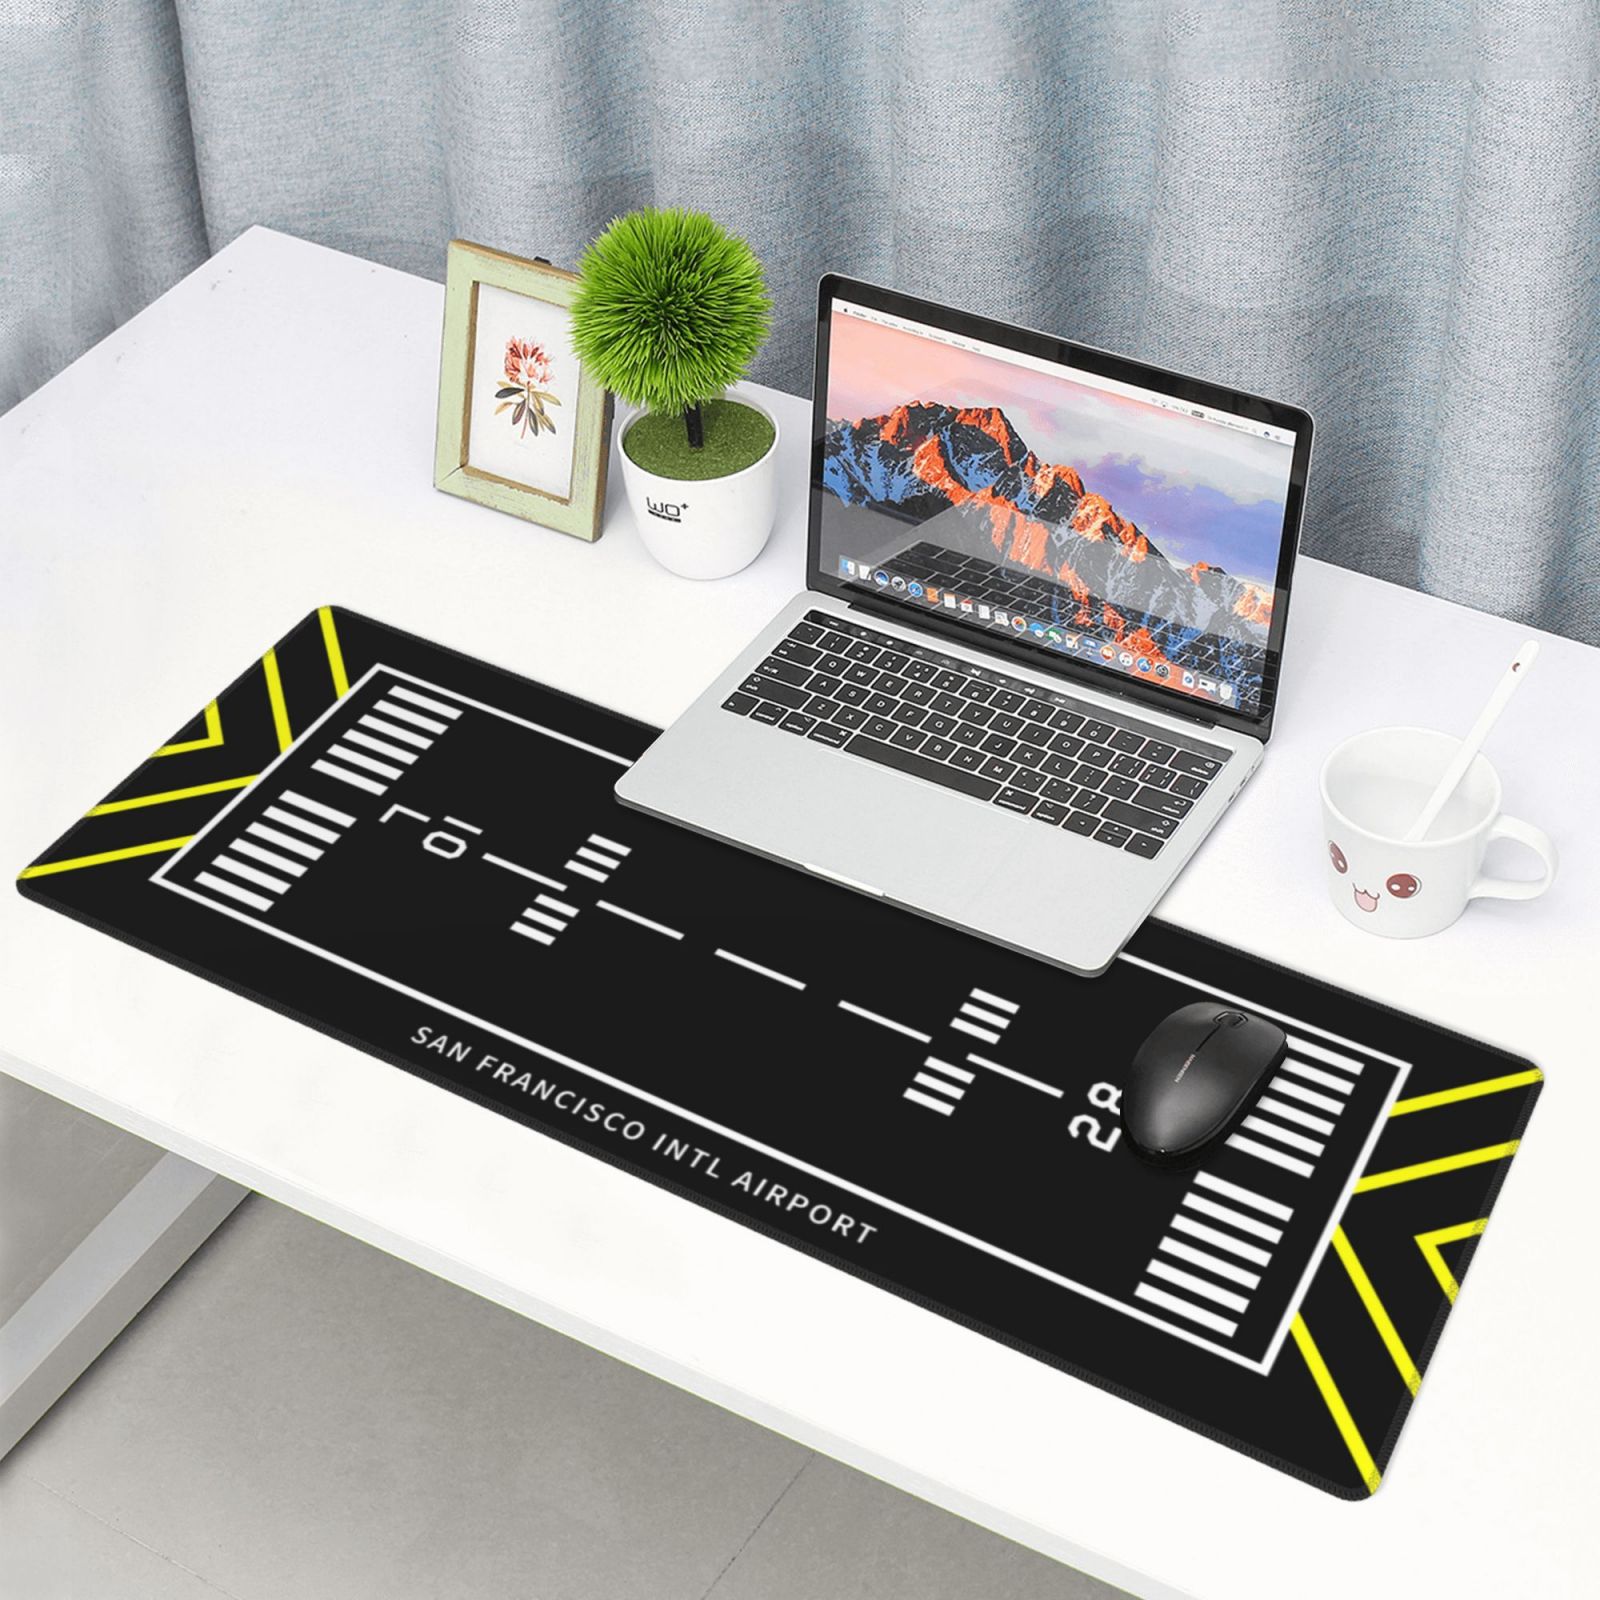 Extra Large Airport Runway Mouse Pad gaming mat . GIft for crew pilot aviation geek and game lovers.